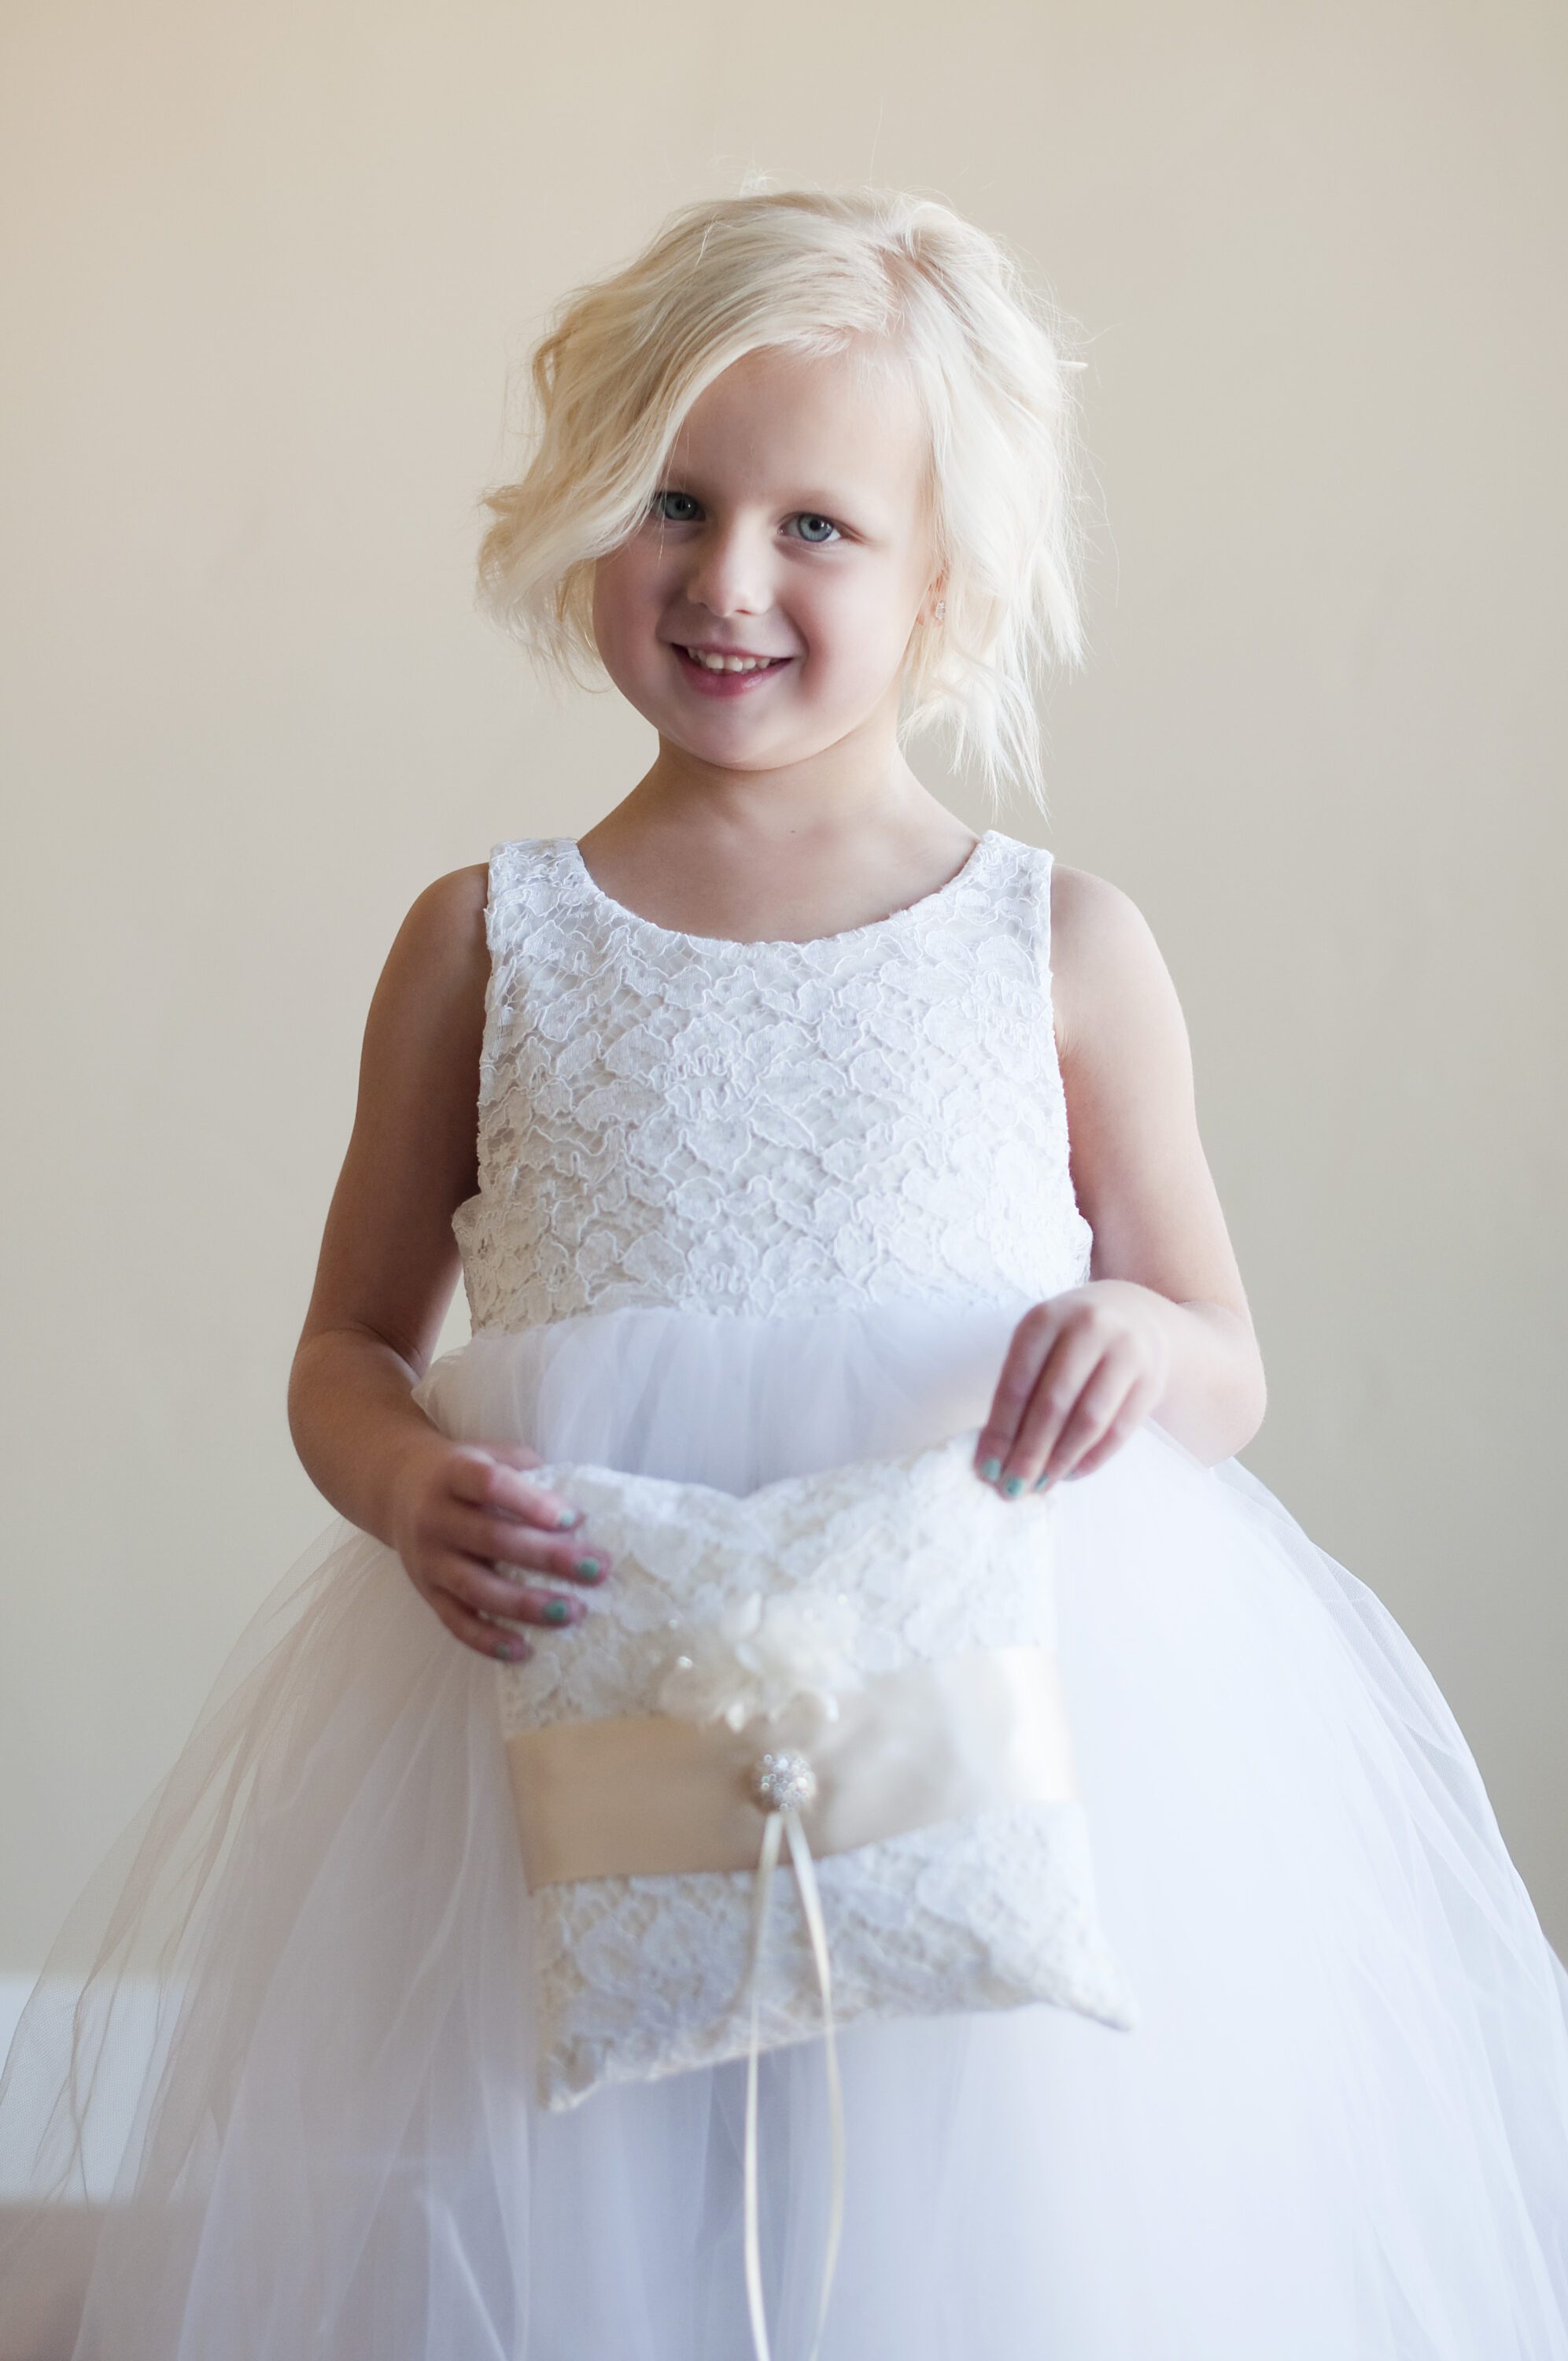 A young flower girl wearing an ivory and white lace flower girl dress